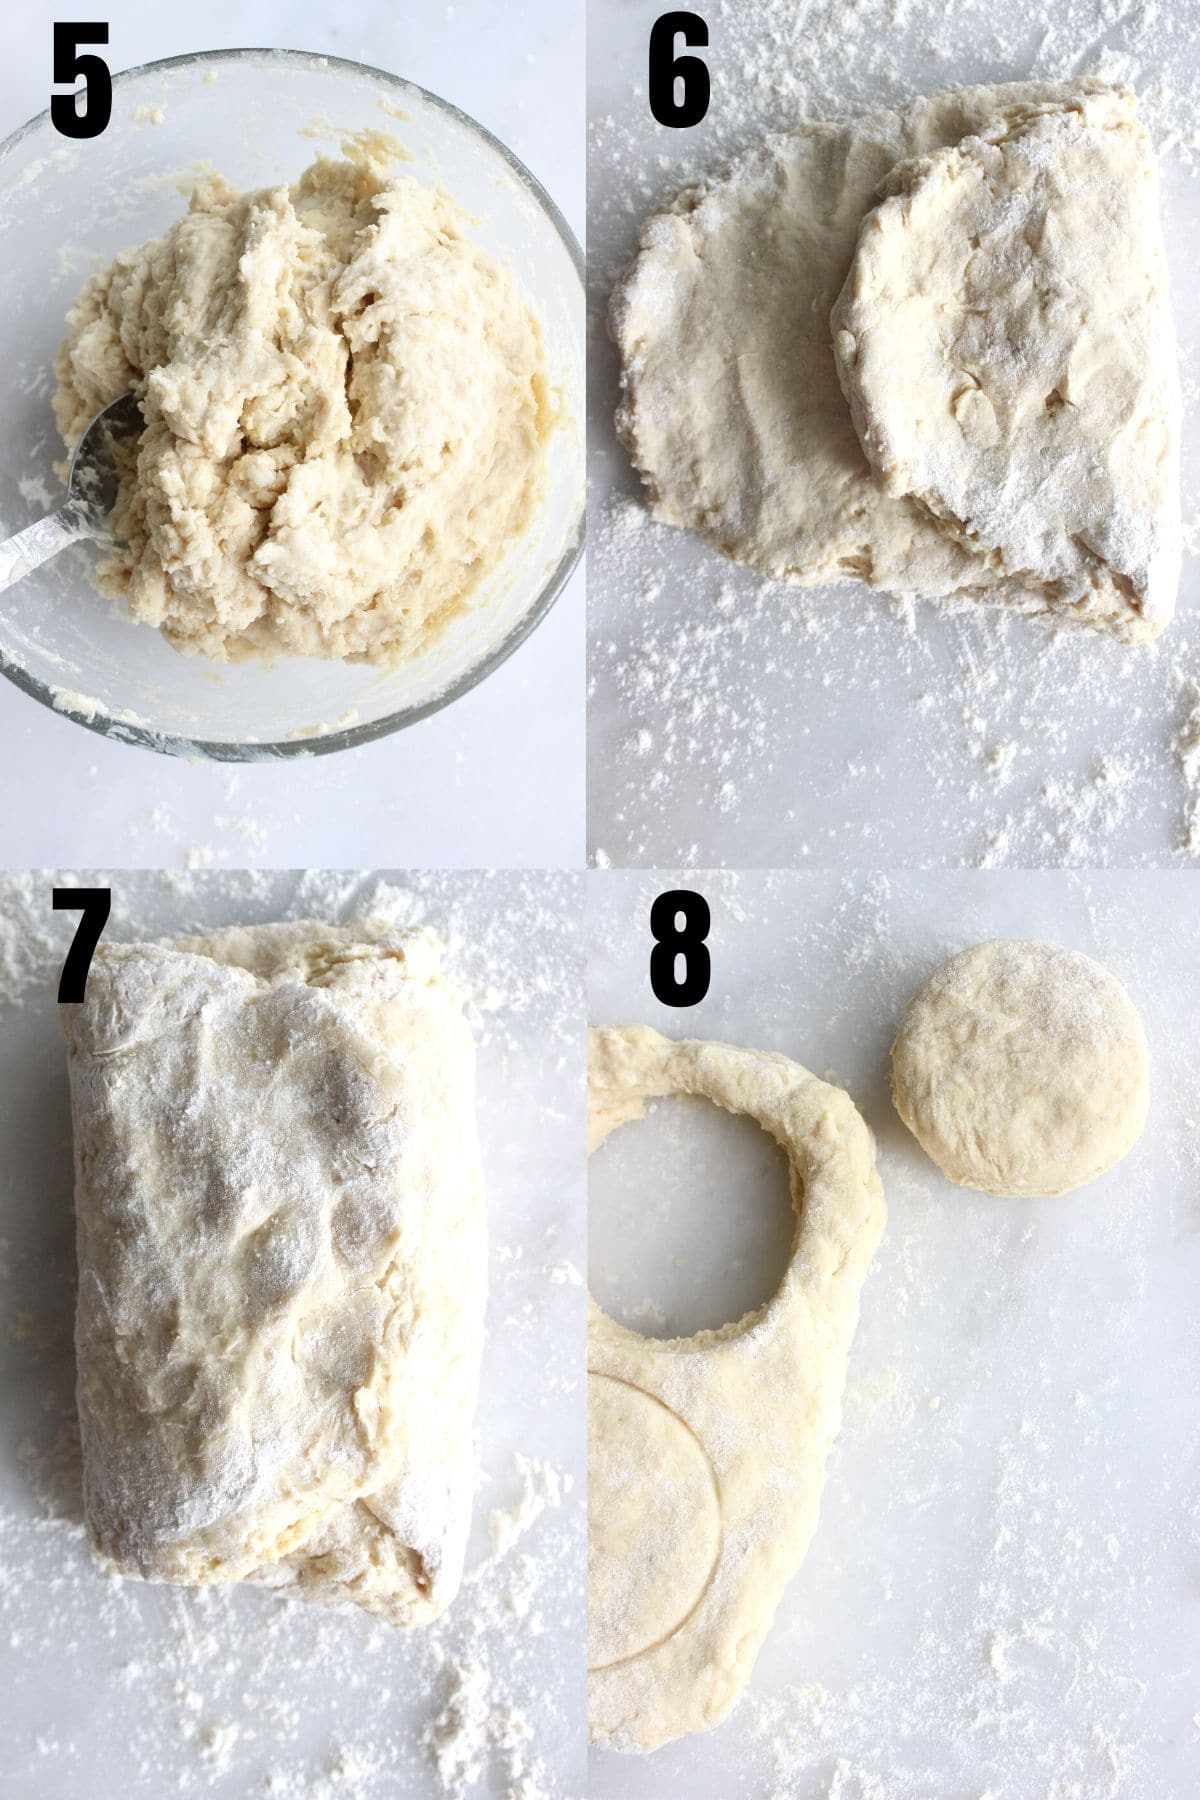 Step by step visual of how to make shortcake biscuits, folding the dough and cutting the biscuits.